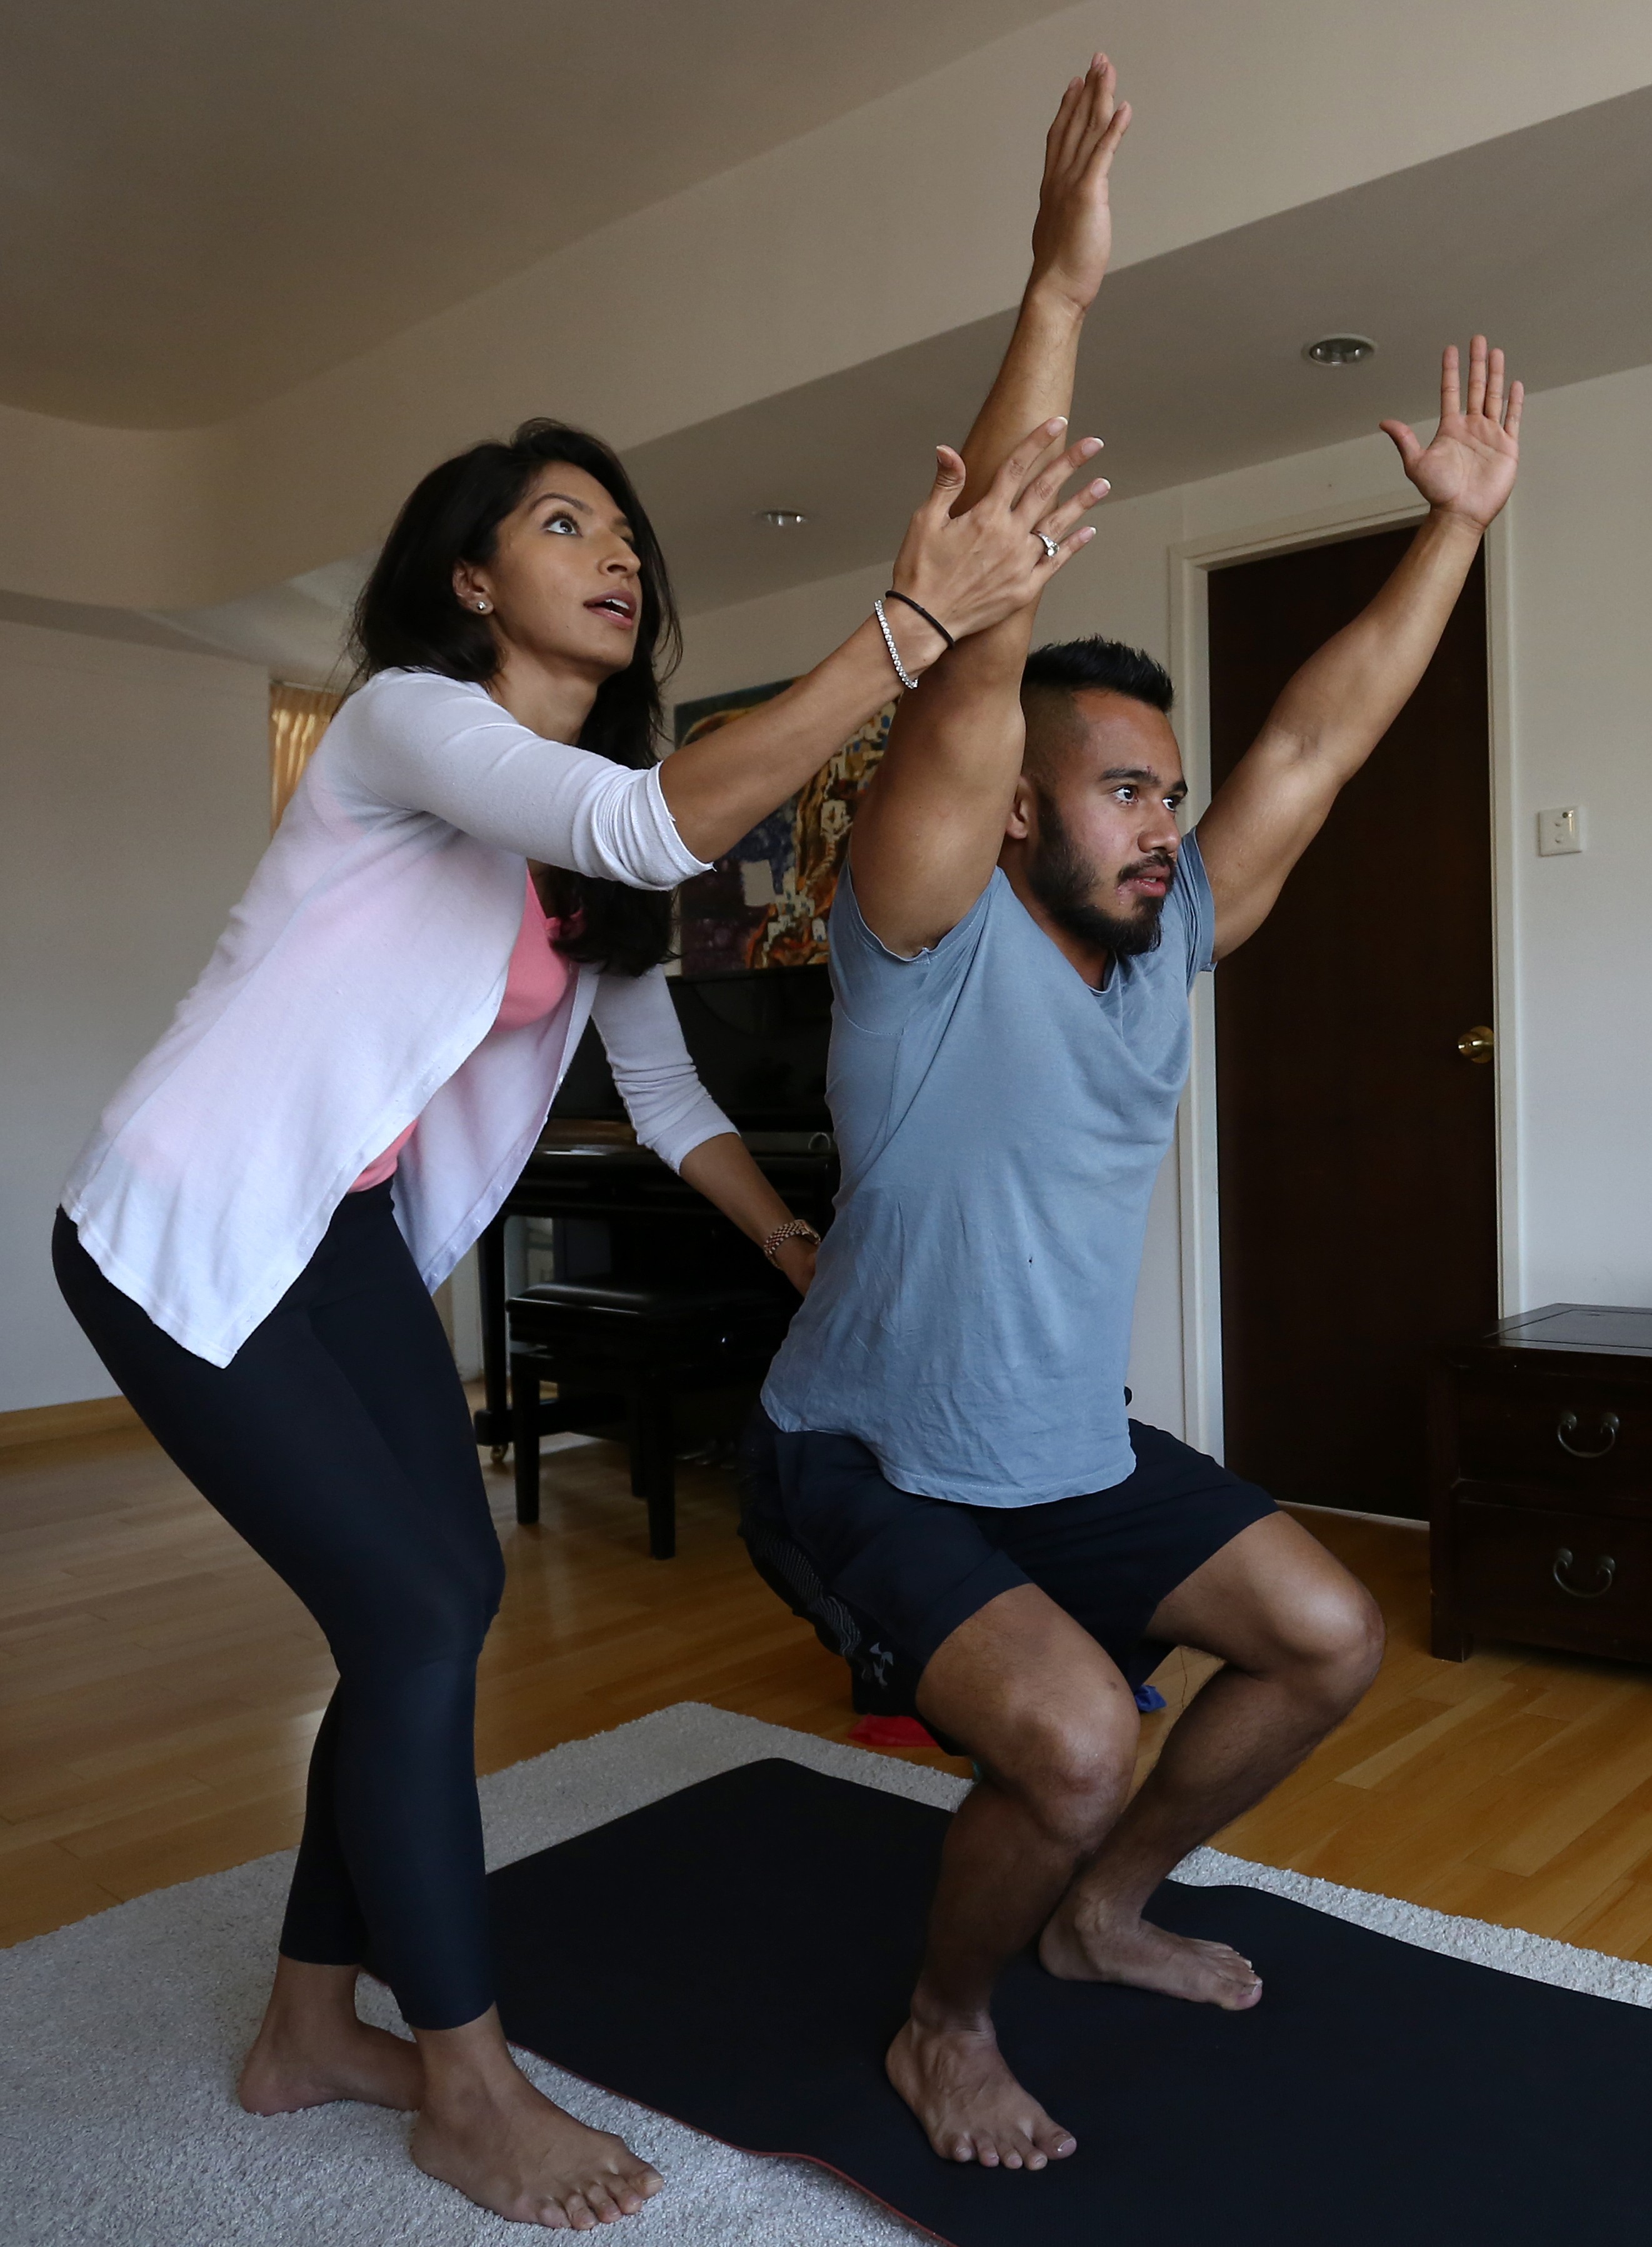 Neelam Harjani, a trader at a bank before she quit to set up Inspire Yoga, says she found yoga was an antidote to stress at work. She now leads classes to help those looking for calm and relief from busy lifestyles. Photo: Jonathan Wong